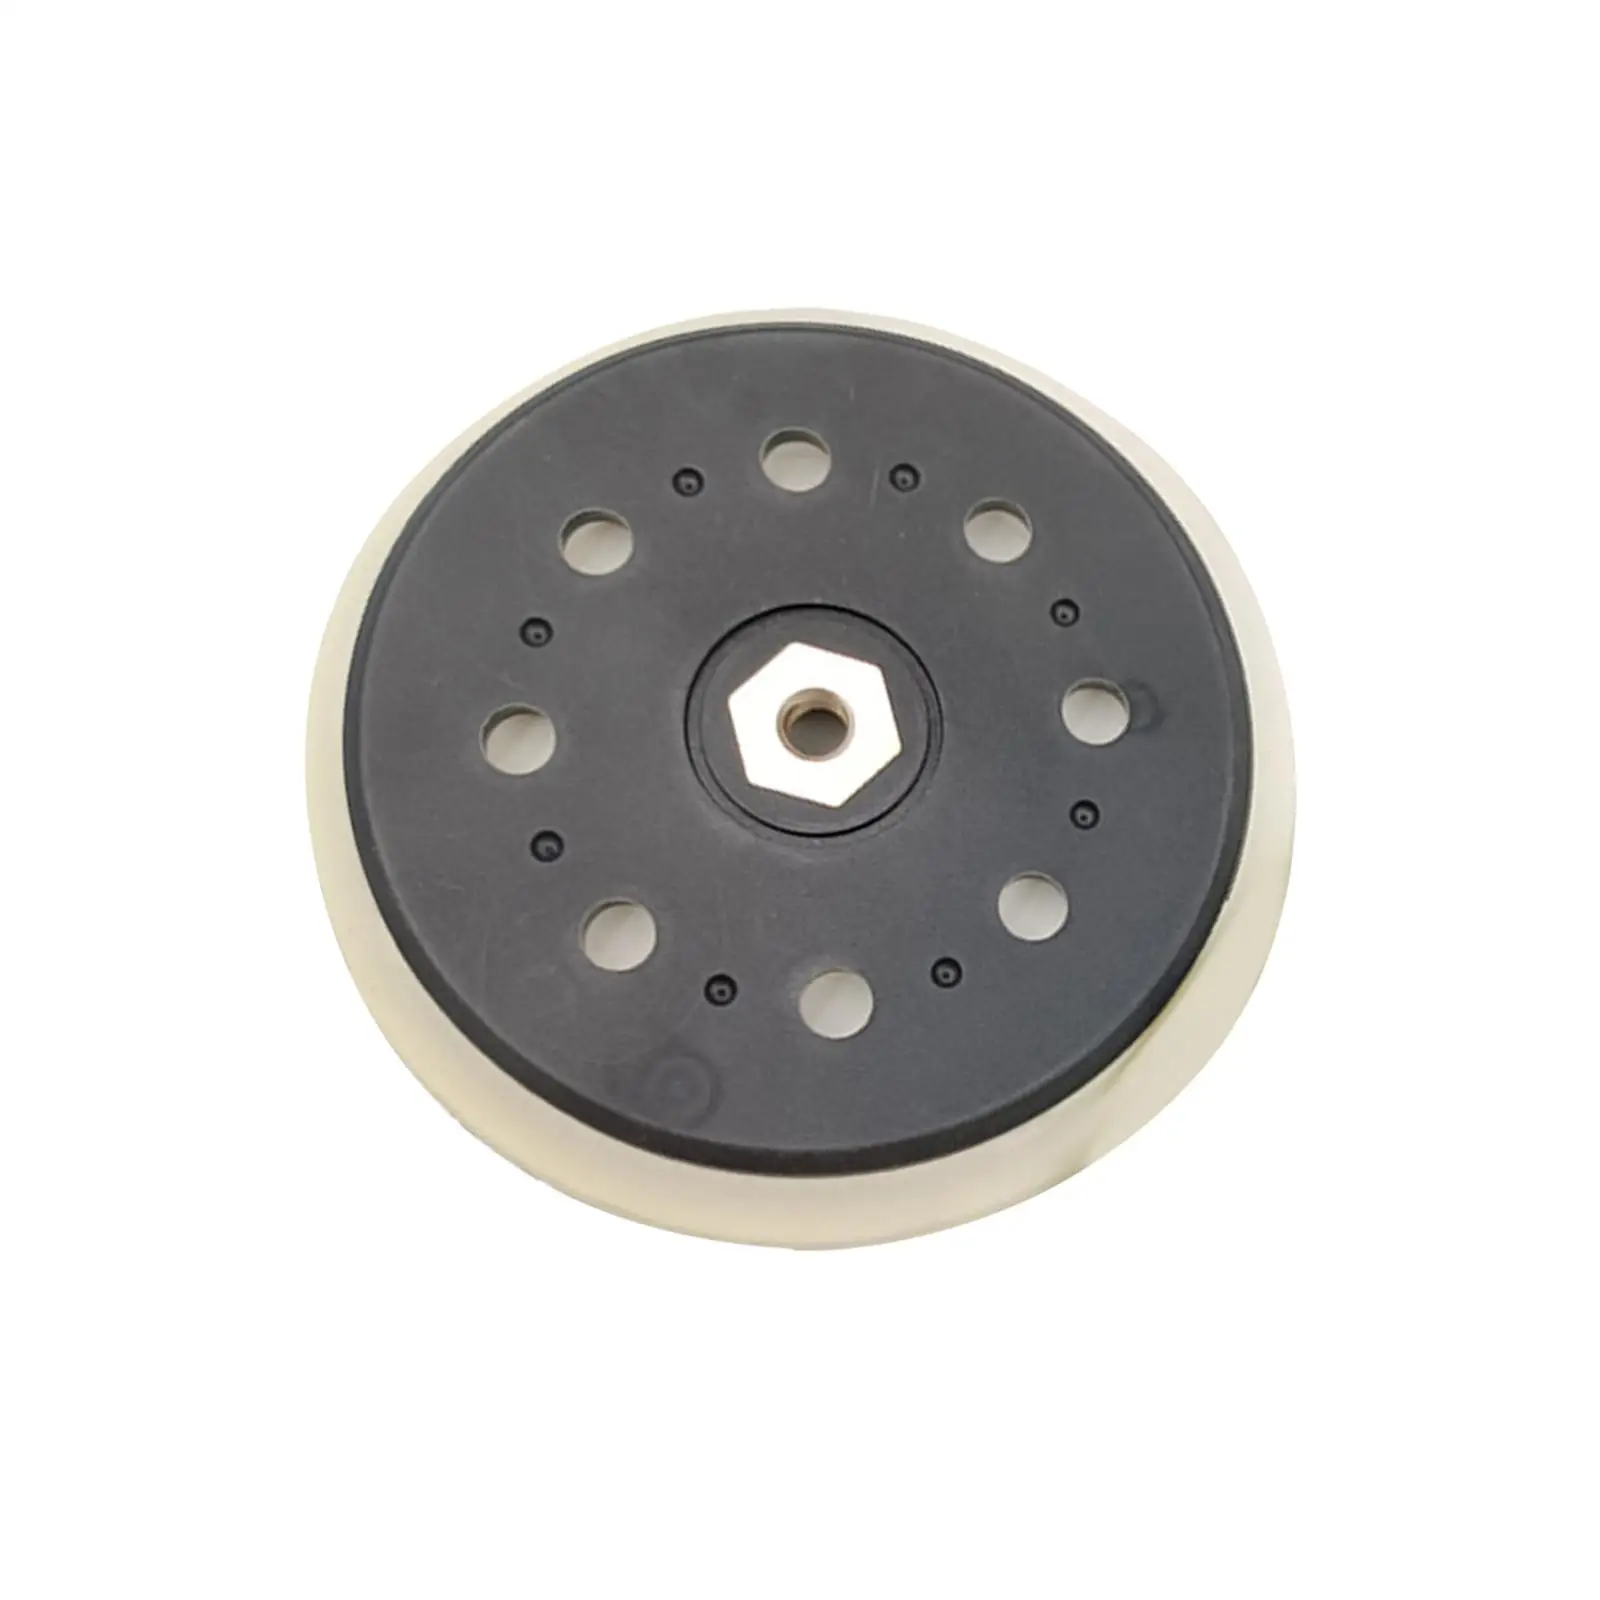 Sander Sanding Disc 148mm Durable with Mount Hole Backup Pad for Carving